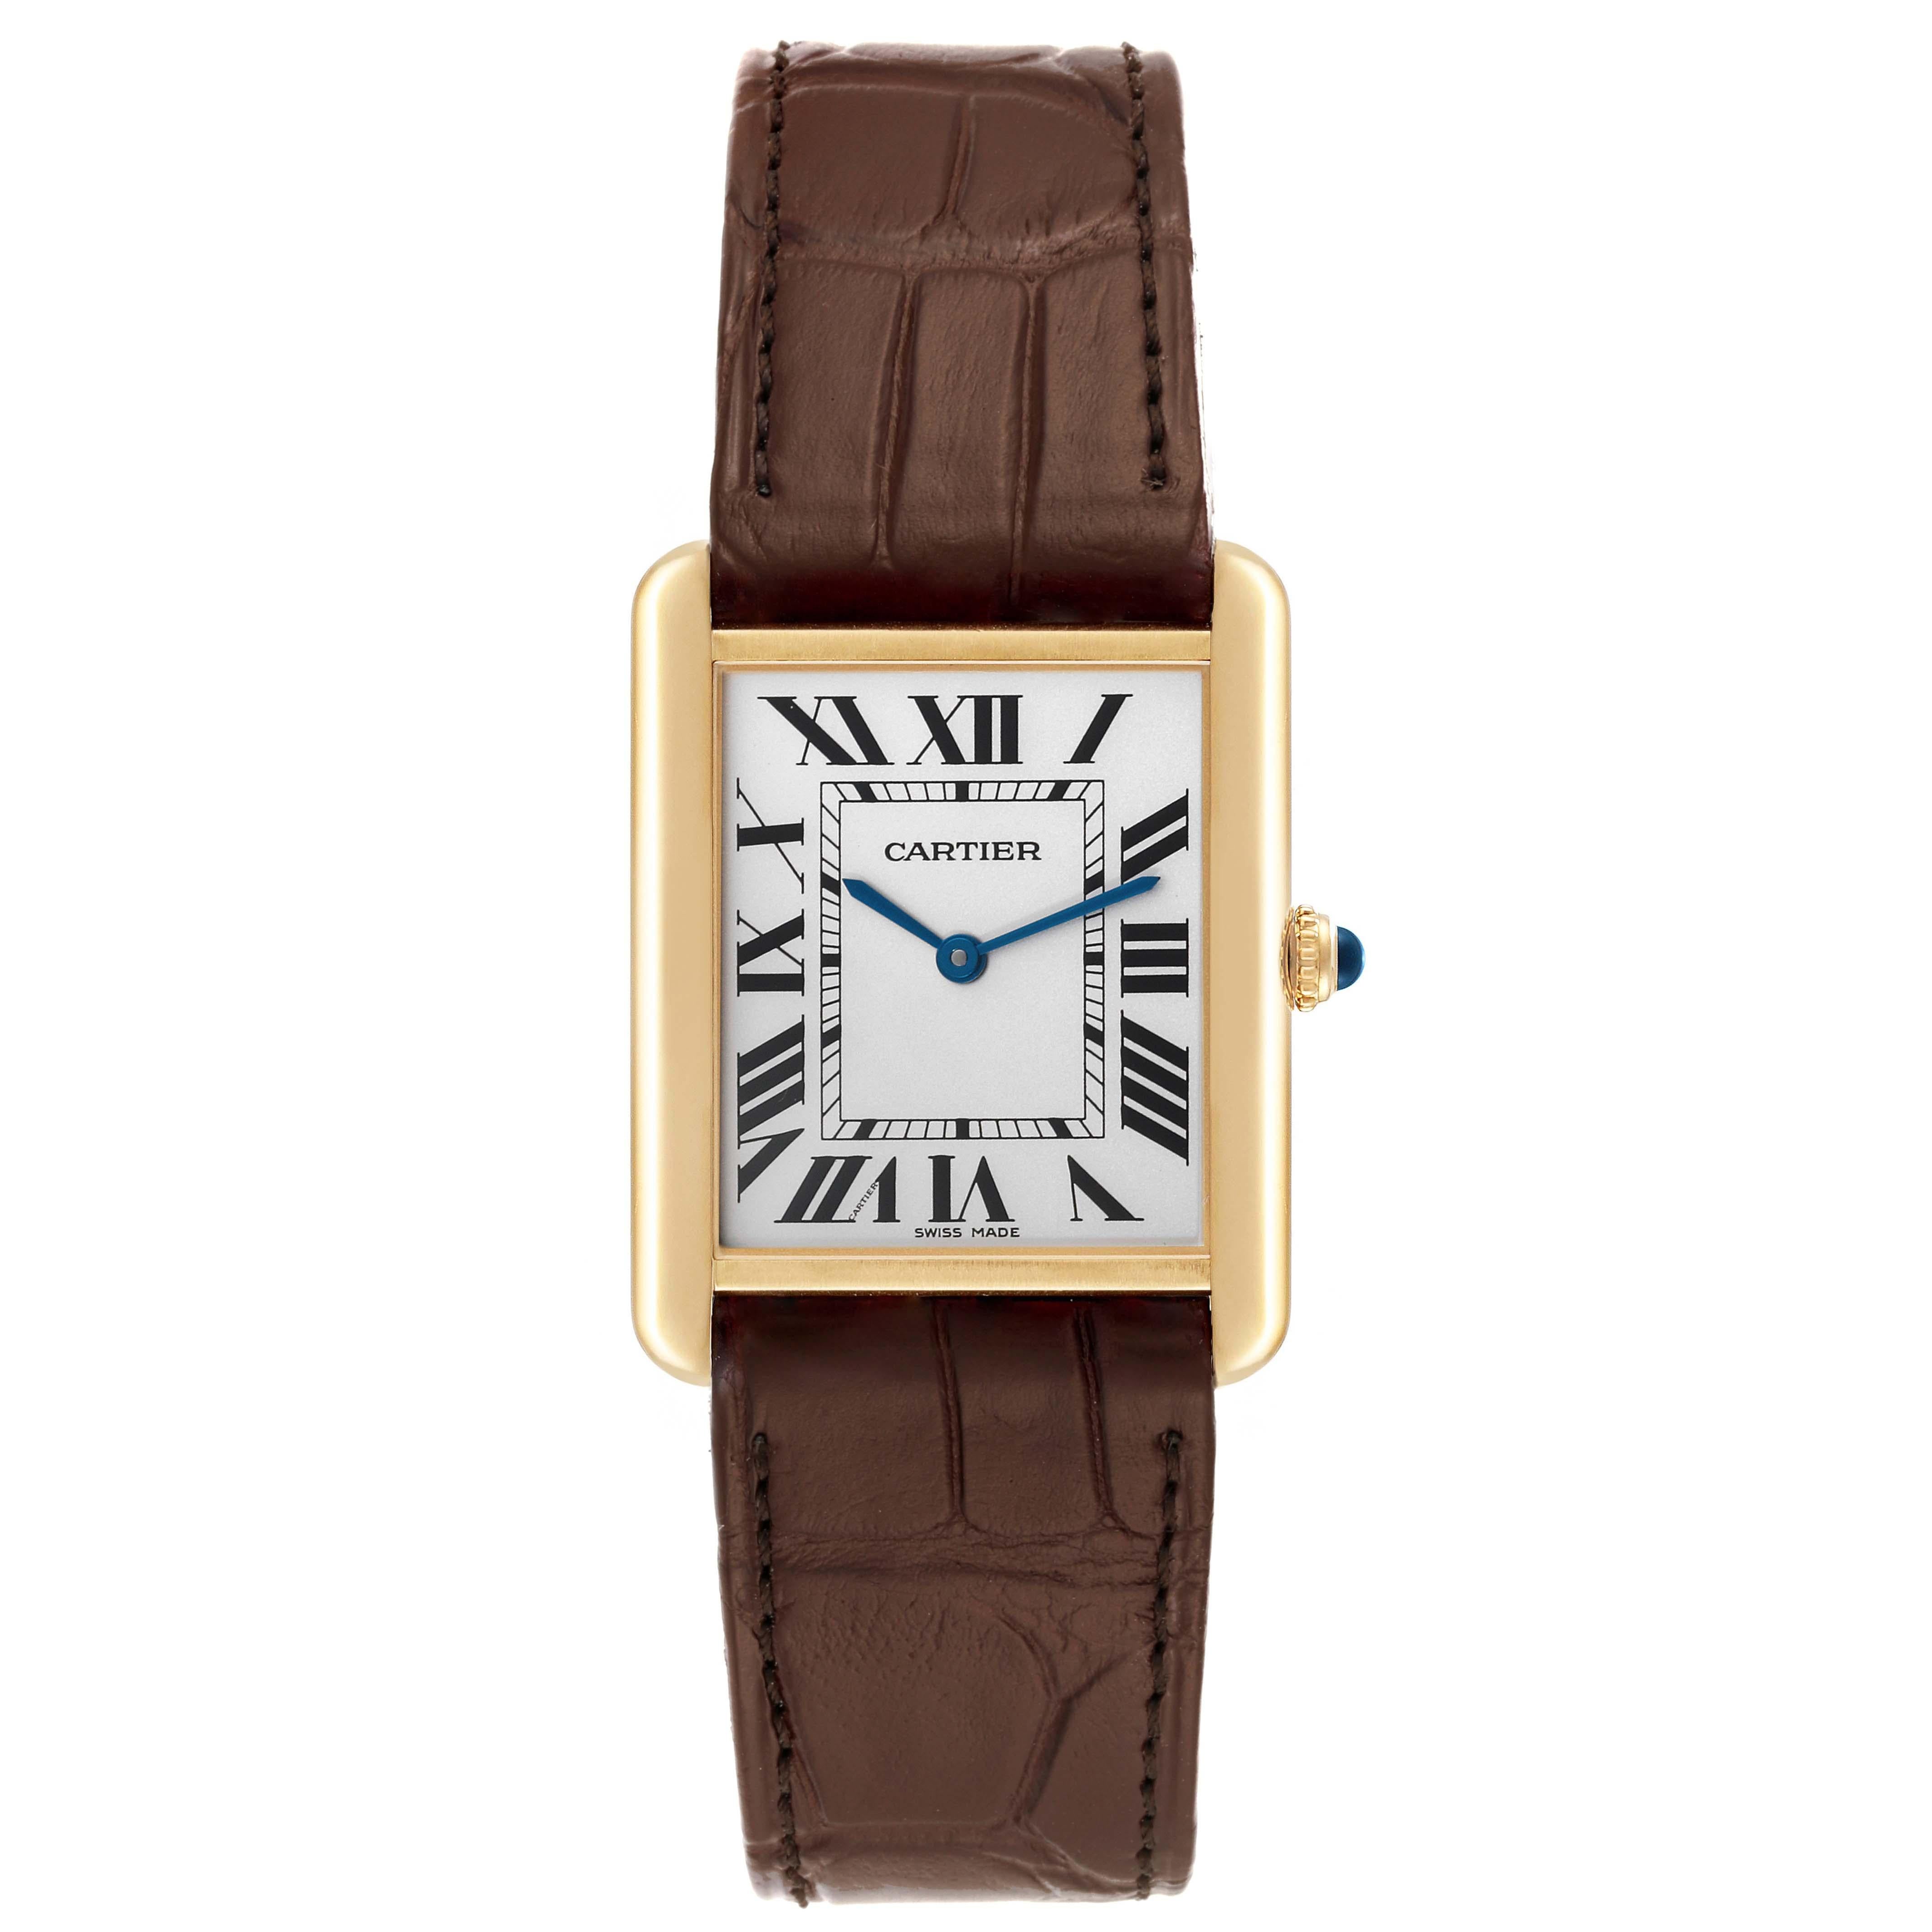 Cartier Tank Solo Yellow Gold Steel Brown Strap Mens Watch W1018855. Quartz movement. 18k yellow gold case 34.0 x 27.0 mm. Stainless steel caseback. Circular grained crown set with a blue spinel cabochon. . Scratch resistant sapphire crystal. Silver